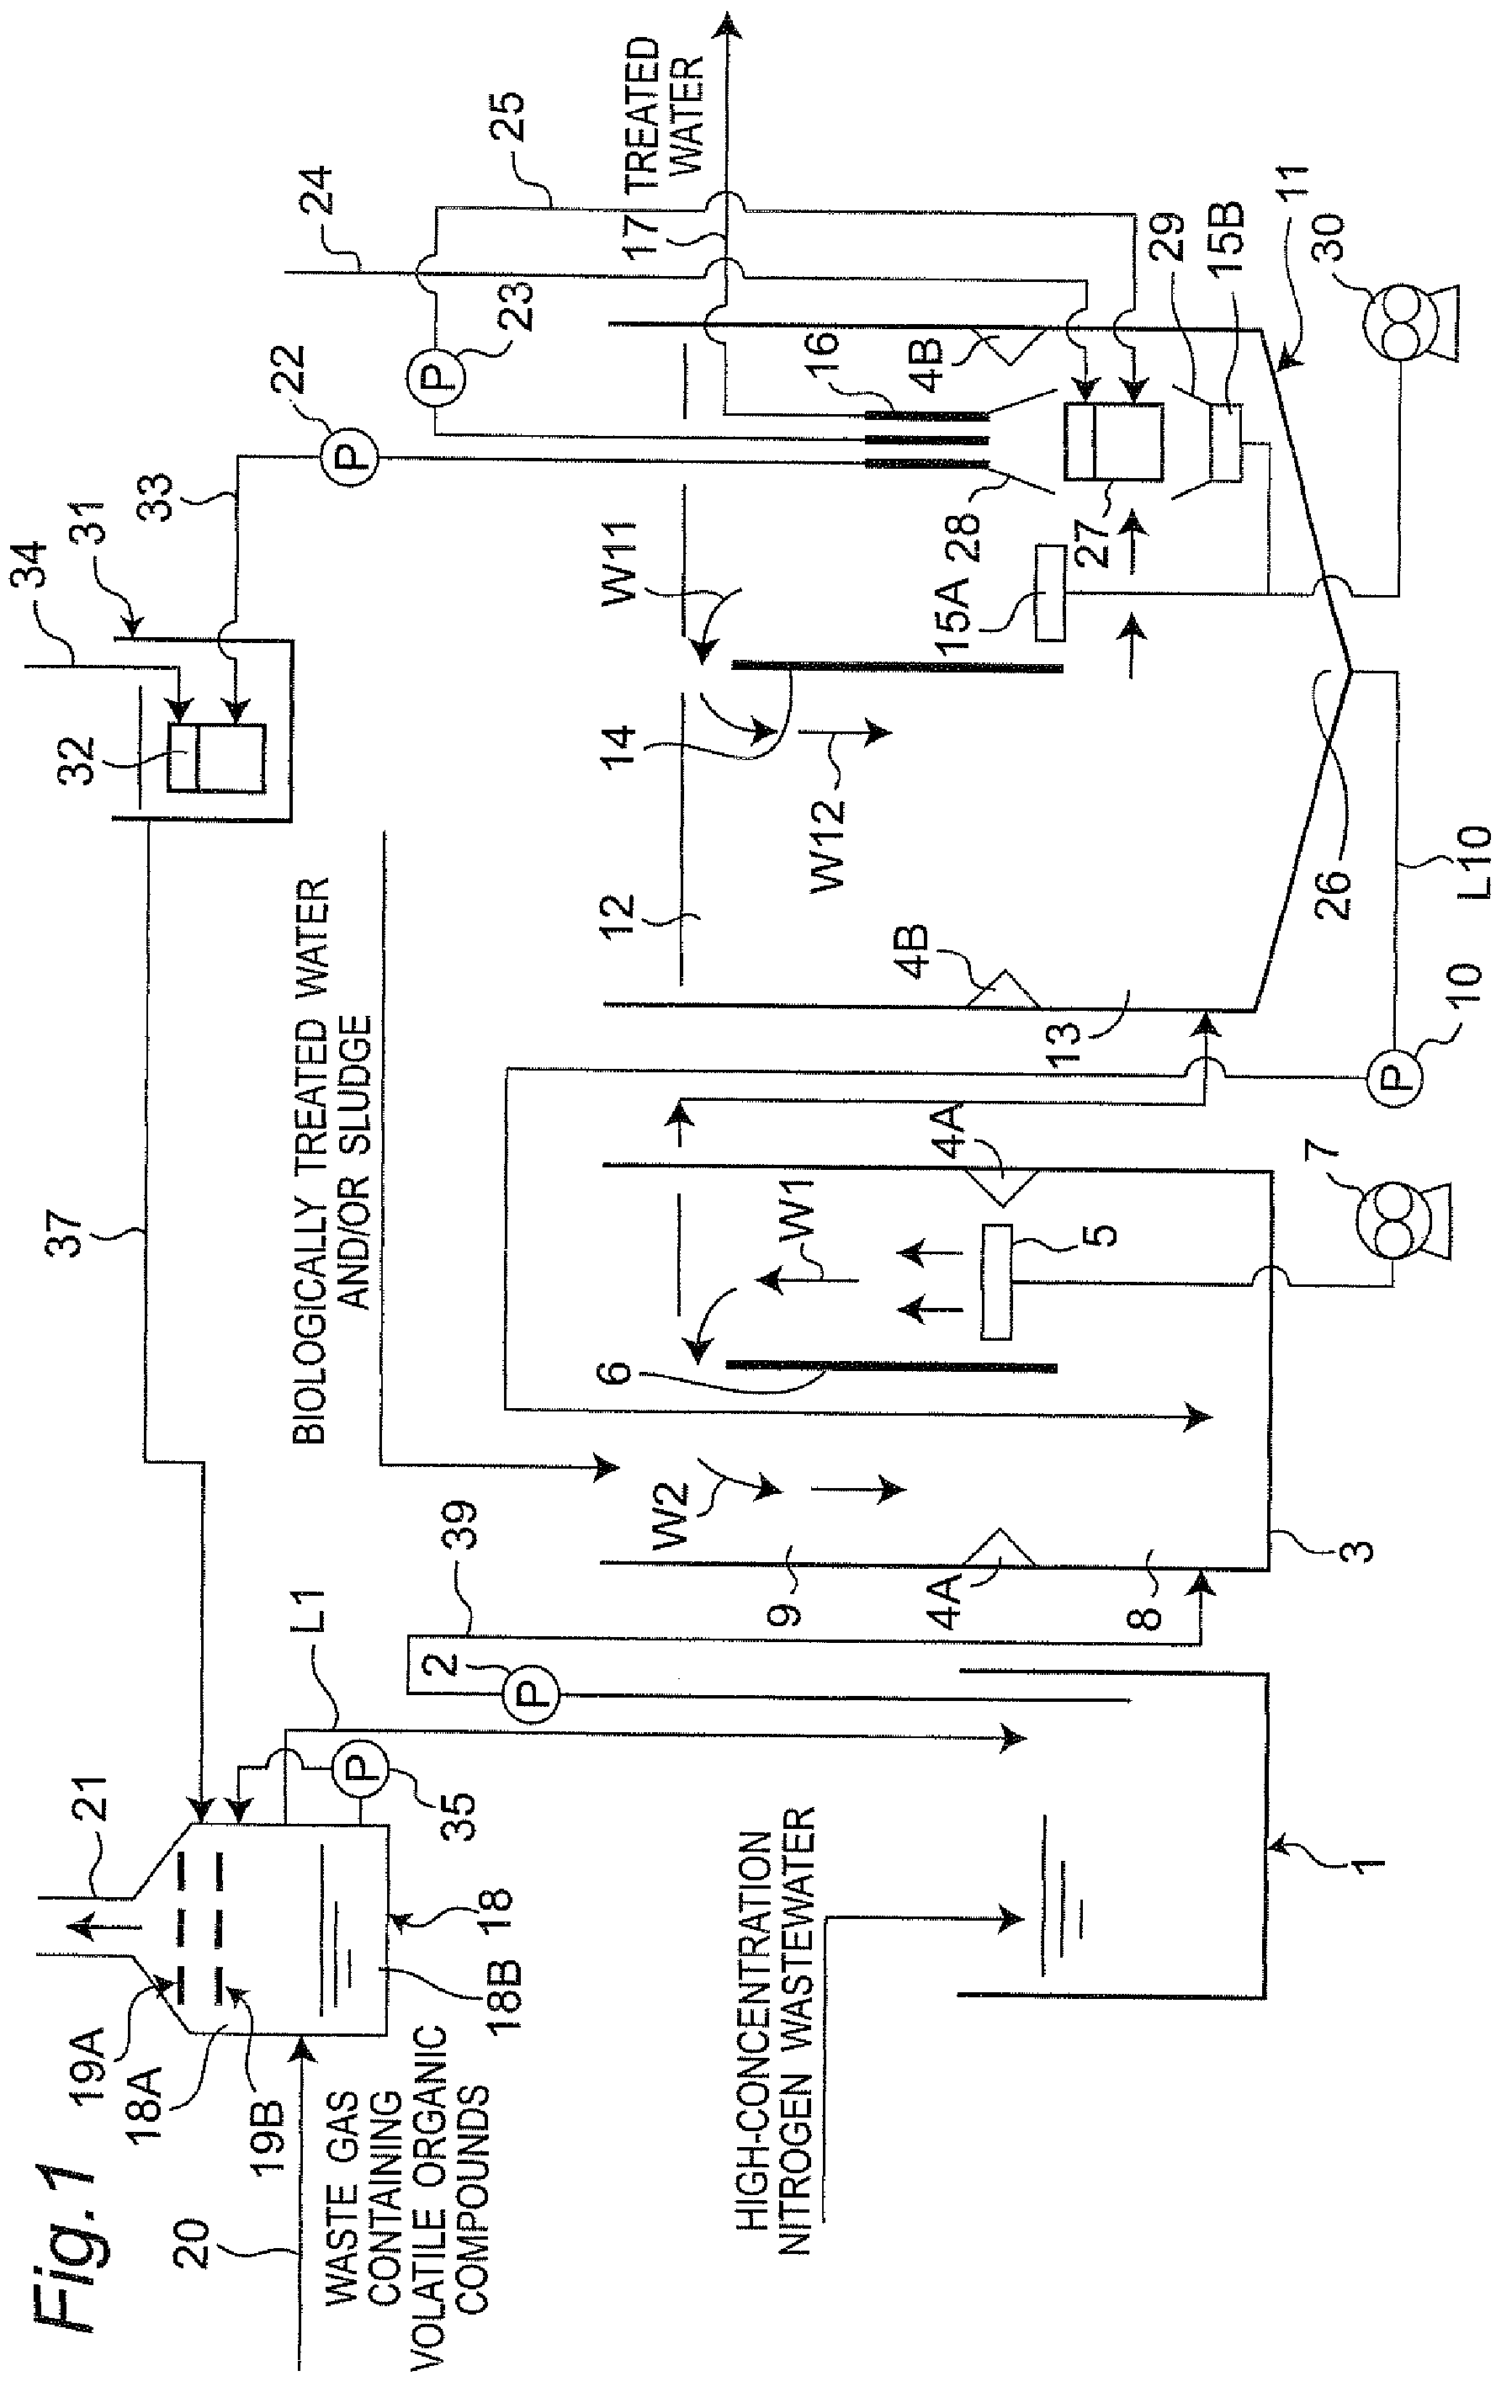 Waste gas/wastewater treatment equipment and method of treating waste gas/wastewater